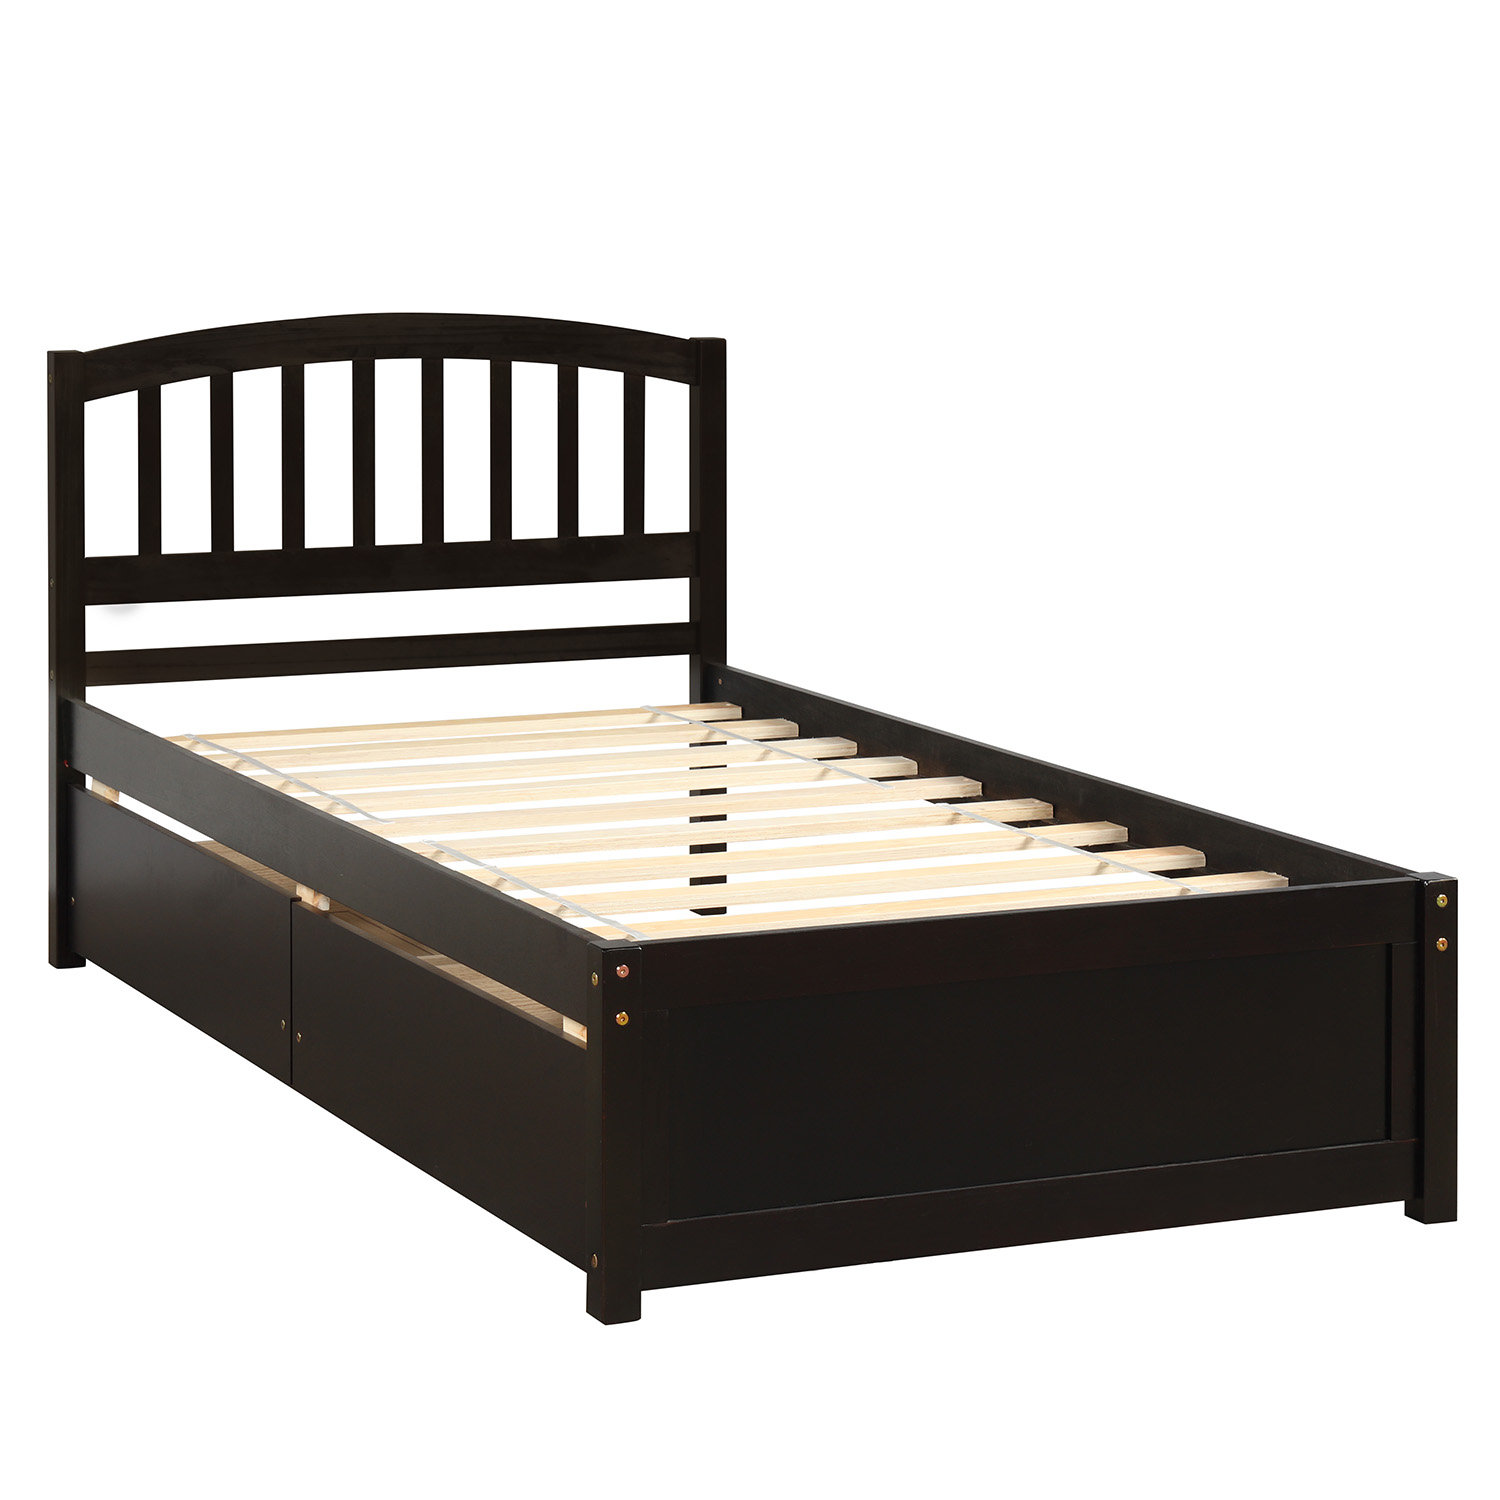 Wood platform bed with two drawers Twin//Full Size Bed Frame With Headboard White